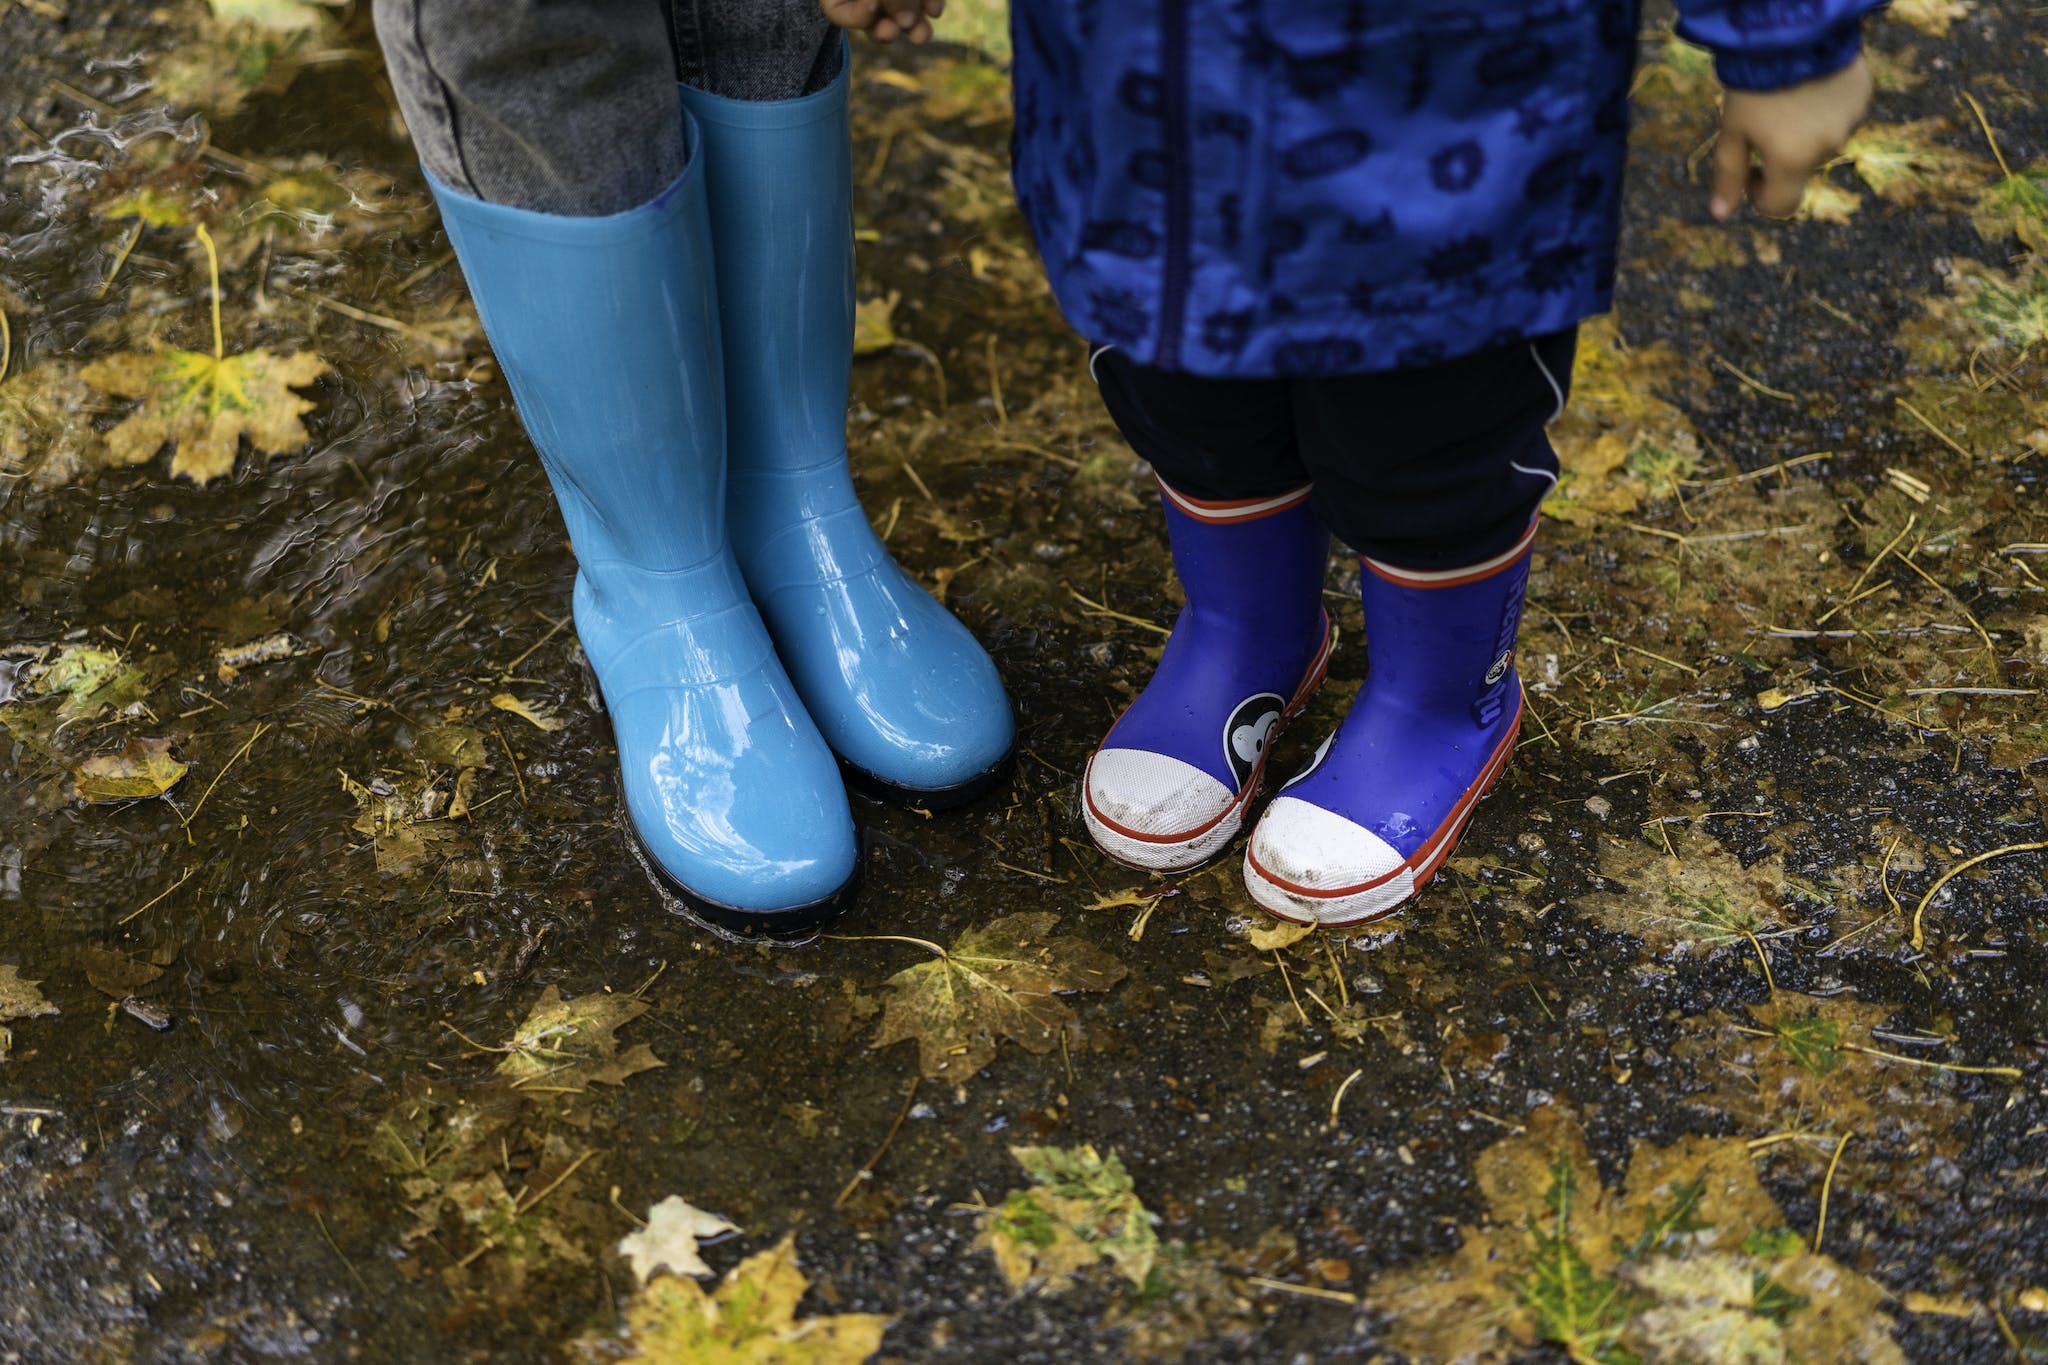 Two People in Rubber Boots 